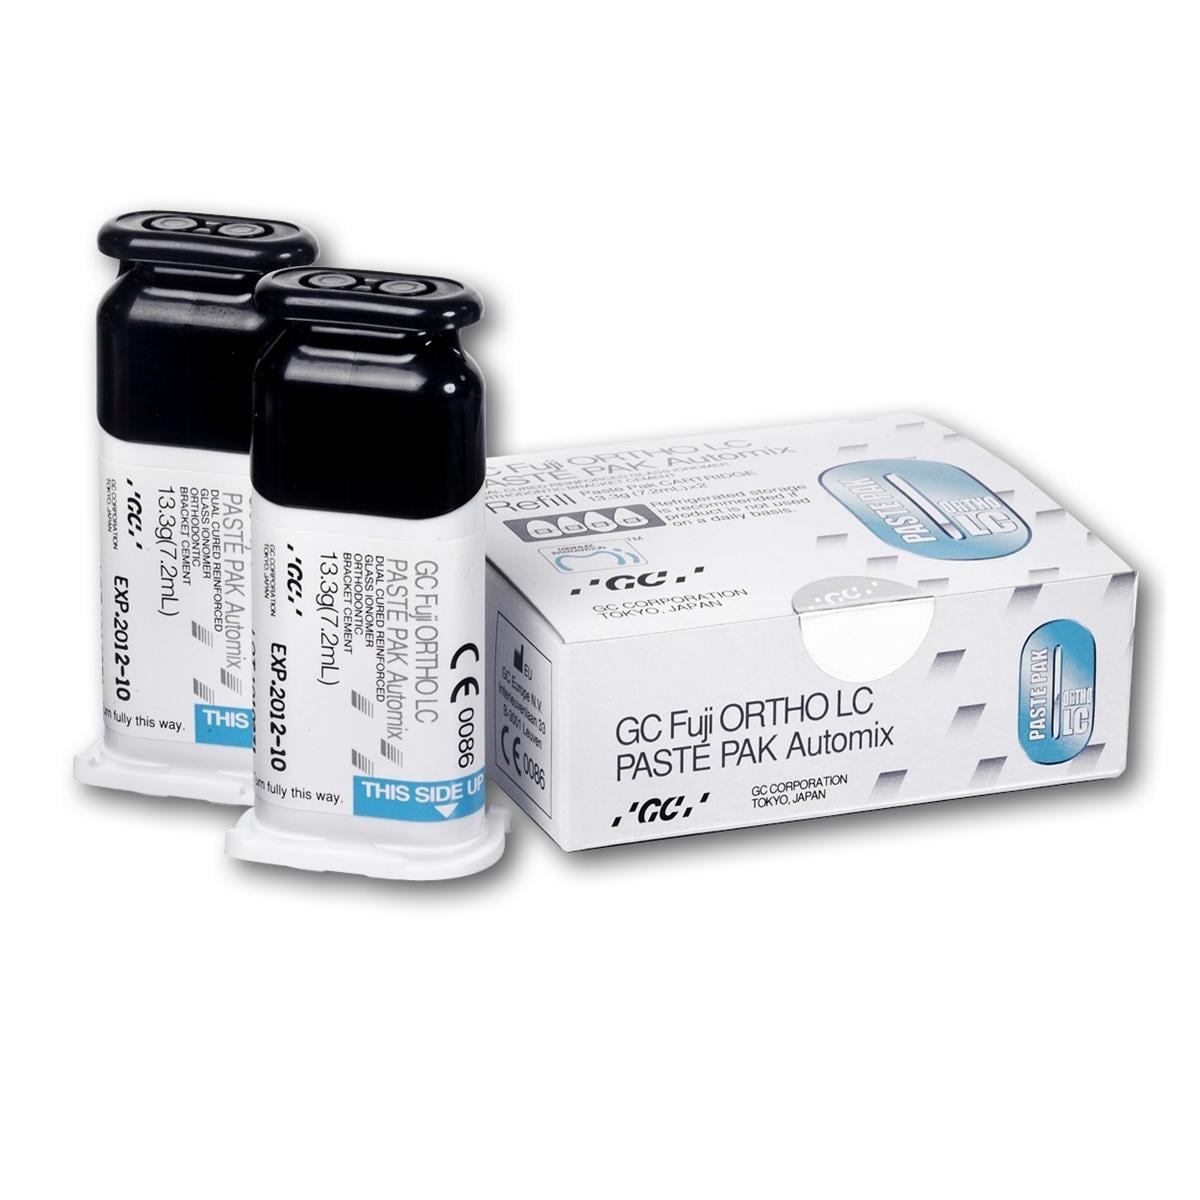 Fuji ORTHO LC Paste Pak Automix complet - Set complet